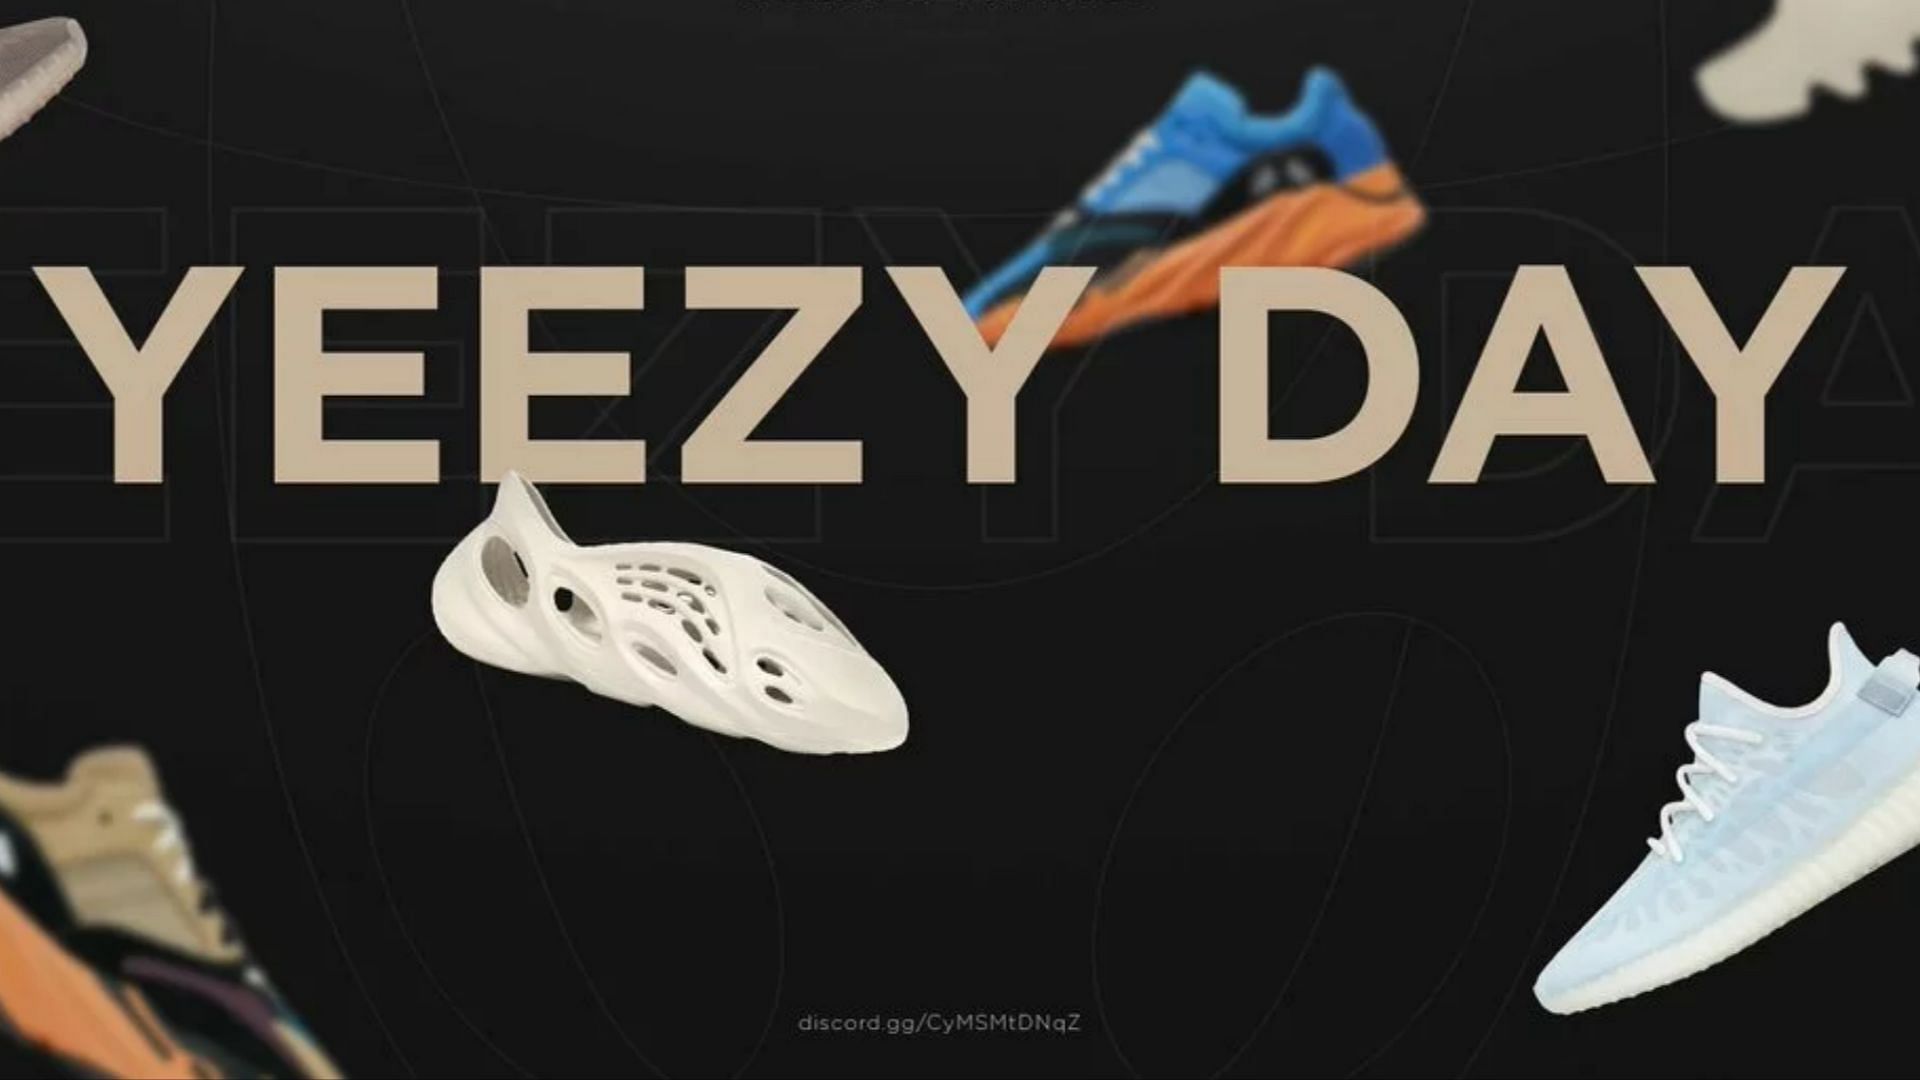 Yeezy Day 2022: Significance, dates, and more details explored (Image via @toejam1027 / Twitter)